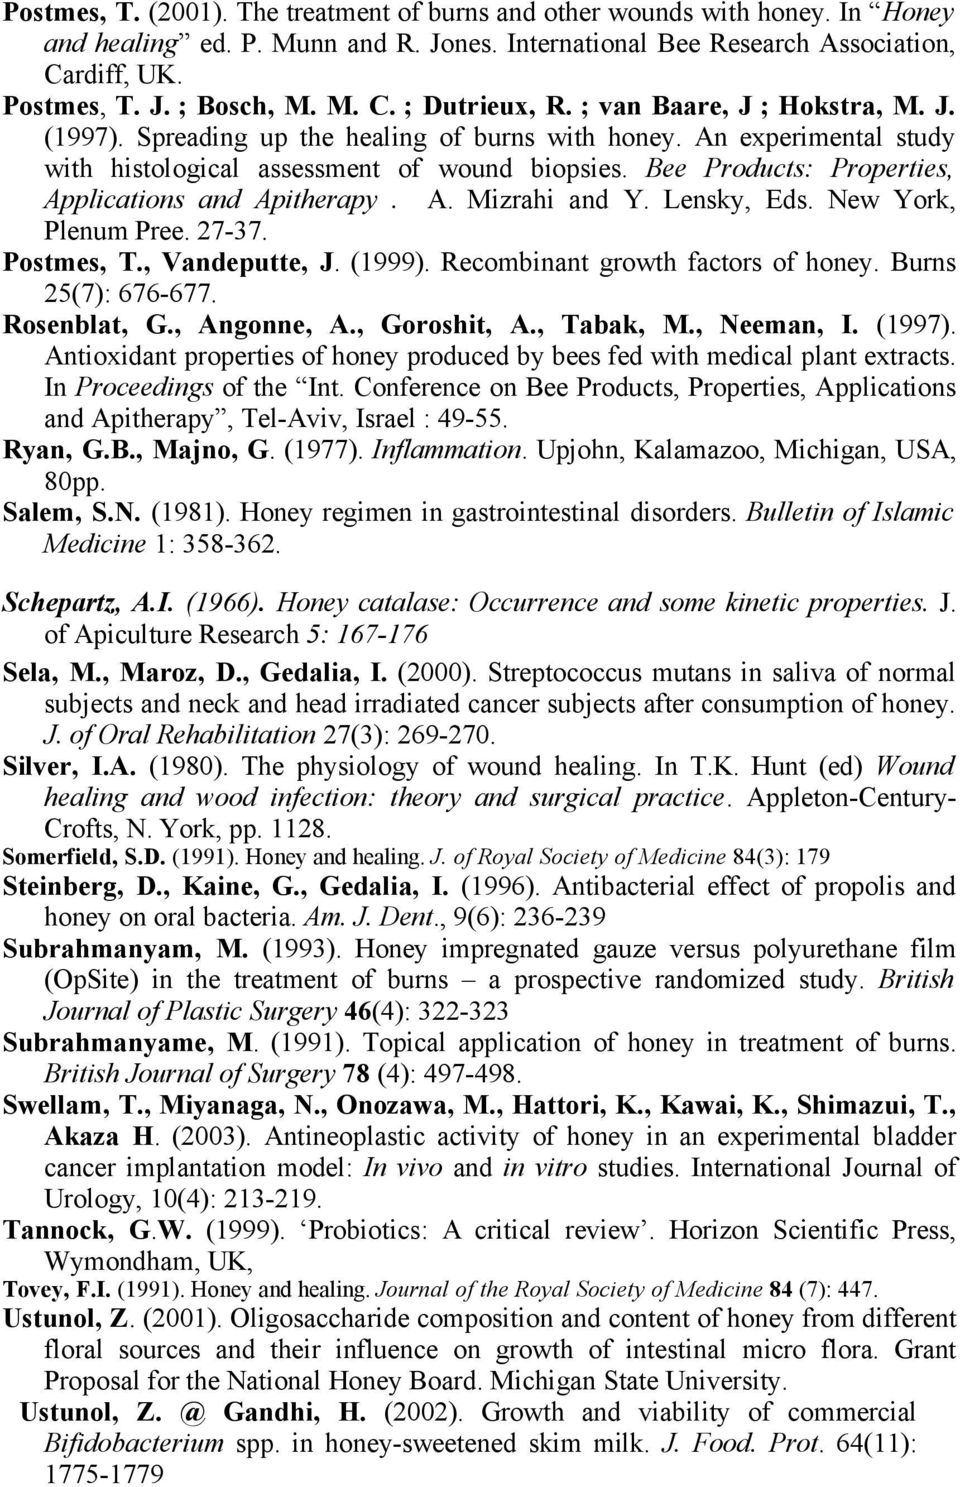 Bee Products: Properties, Applications and Apitherapy. A. Mizrahi and Y. Lensky, Eds. New York, Plenum Pree. 27-37. Postmes, T., Vandeputte, J. (1999). Recombinant growth factors of honey.